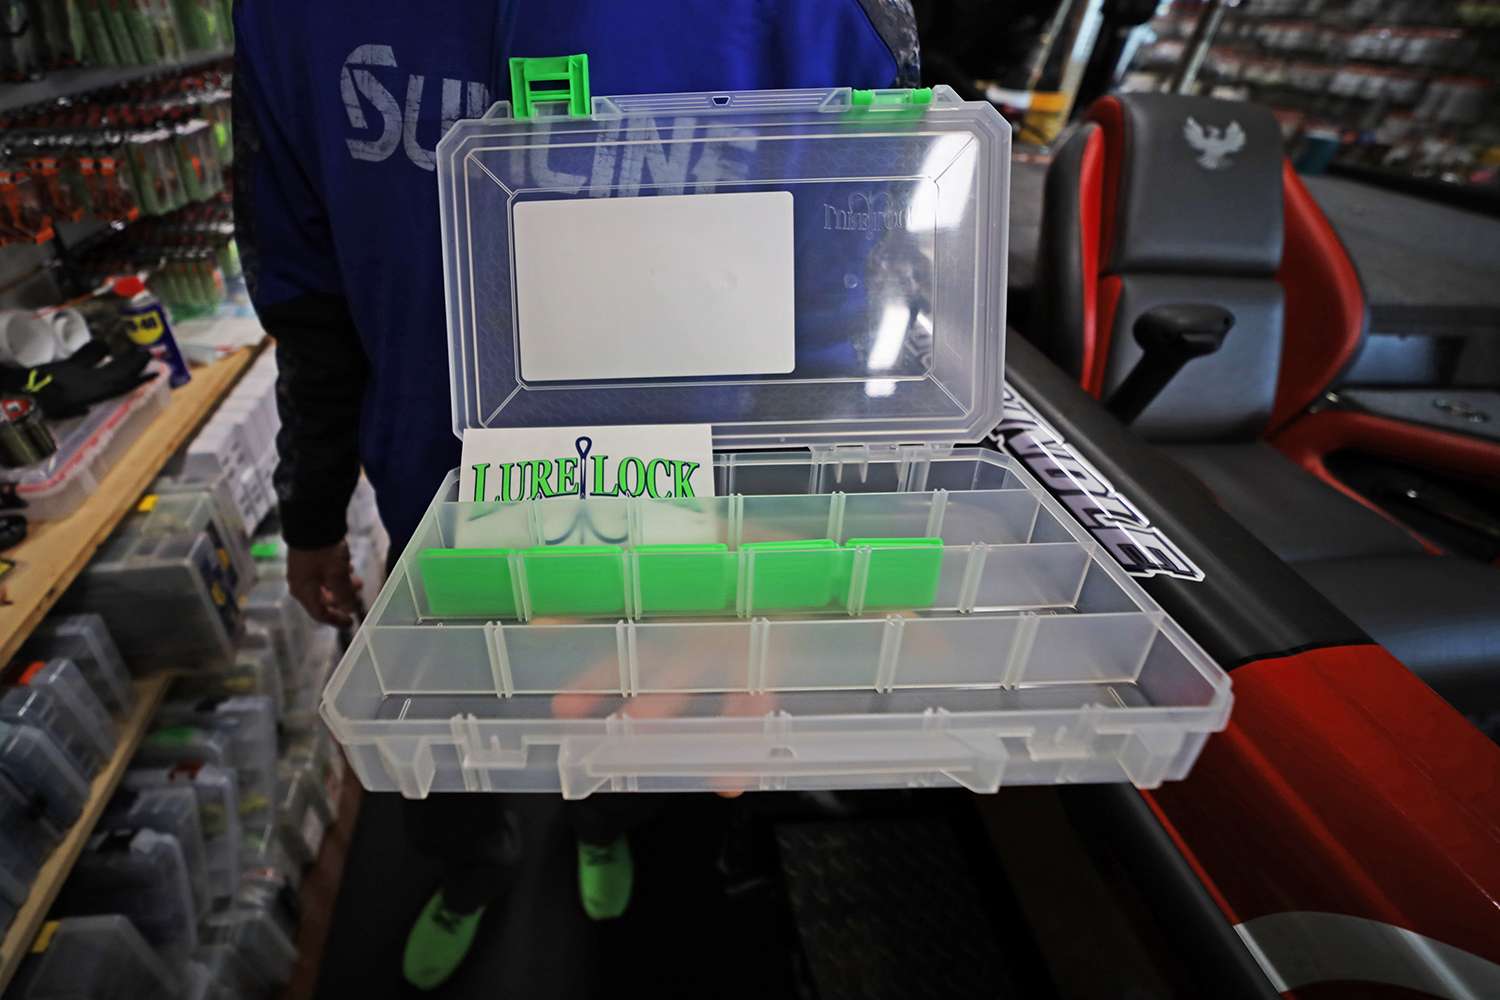 Bassmaster Elite Series pro Gerald Swindle fills up one of his Lure Lock tackleboxes with the baits he'd suggest for a young or new bass angler.